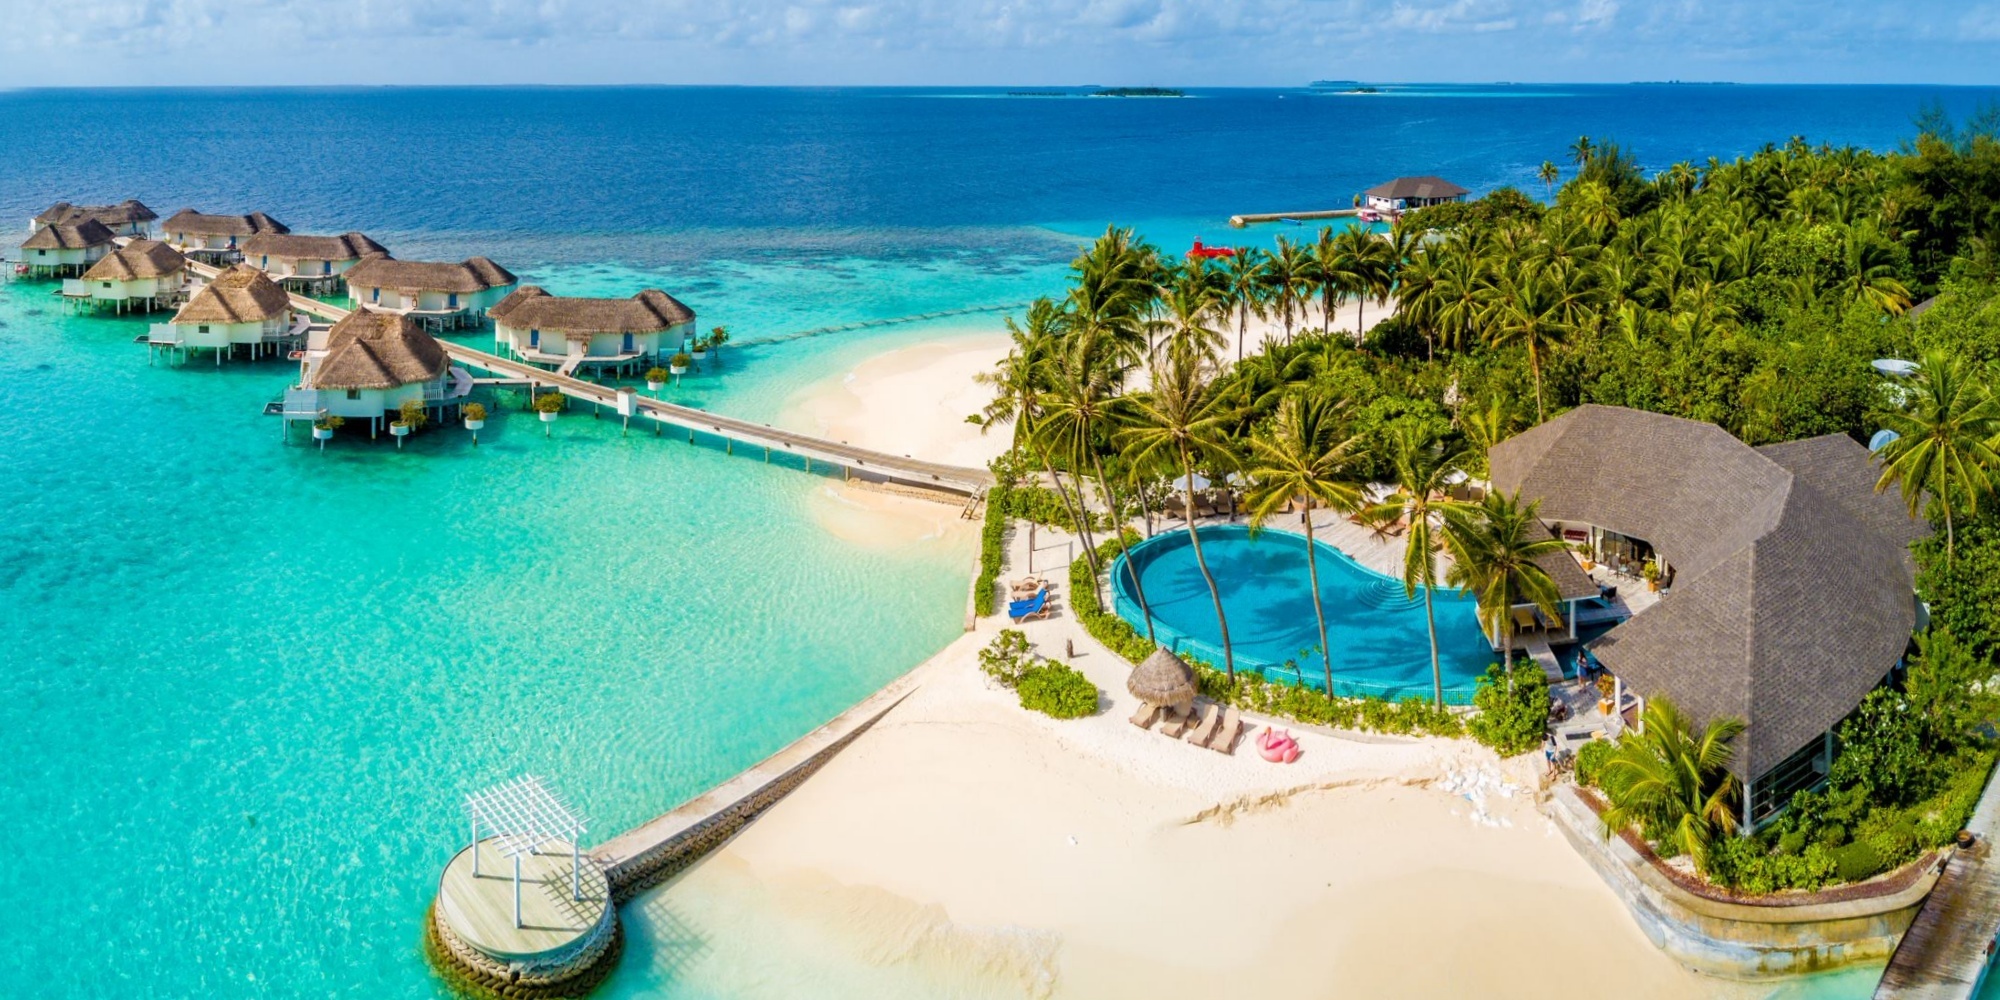 10 Best Overwater Villas in Maldives For a Luxurious Holiday